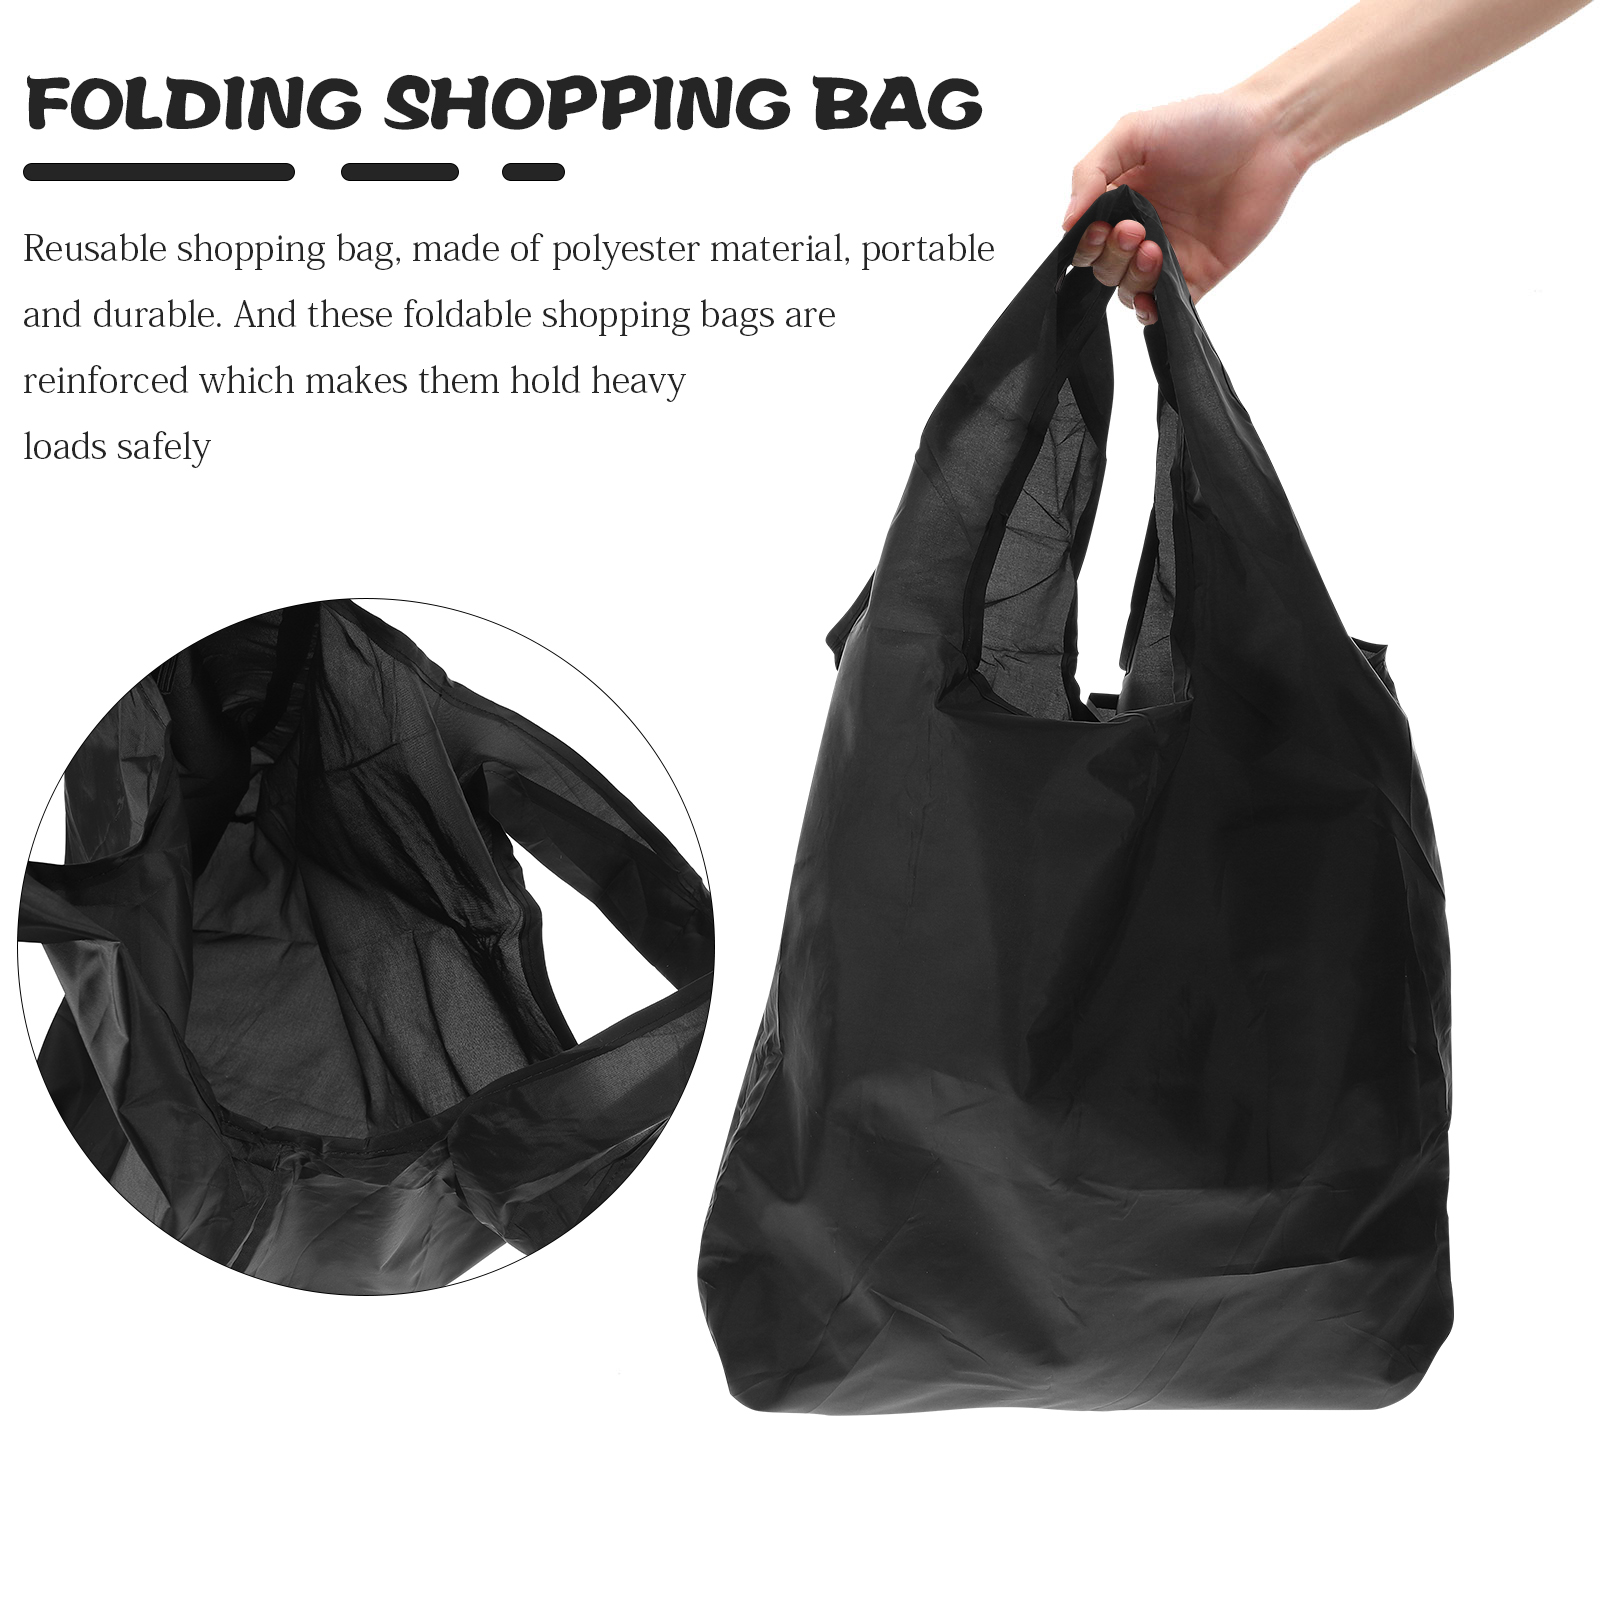 4 Pcs Shopping Bag Reusable Grocery Bags Heavy Duty Reuse for Groceries ...